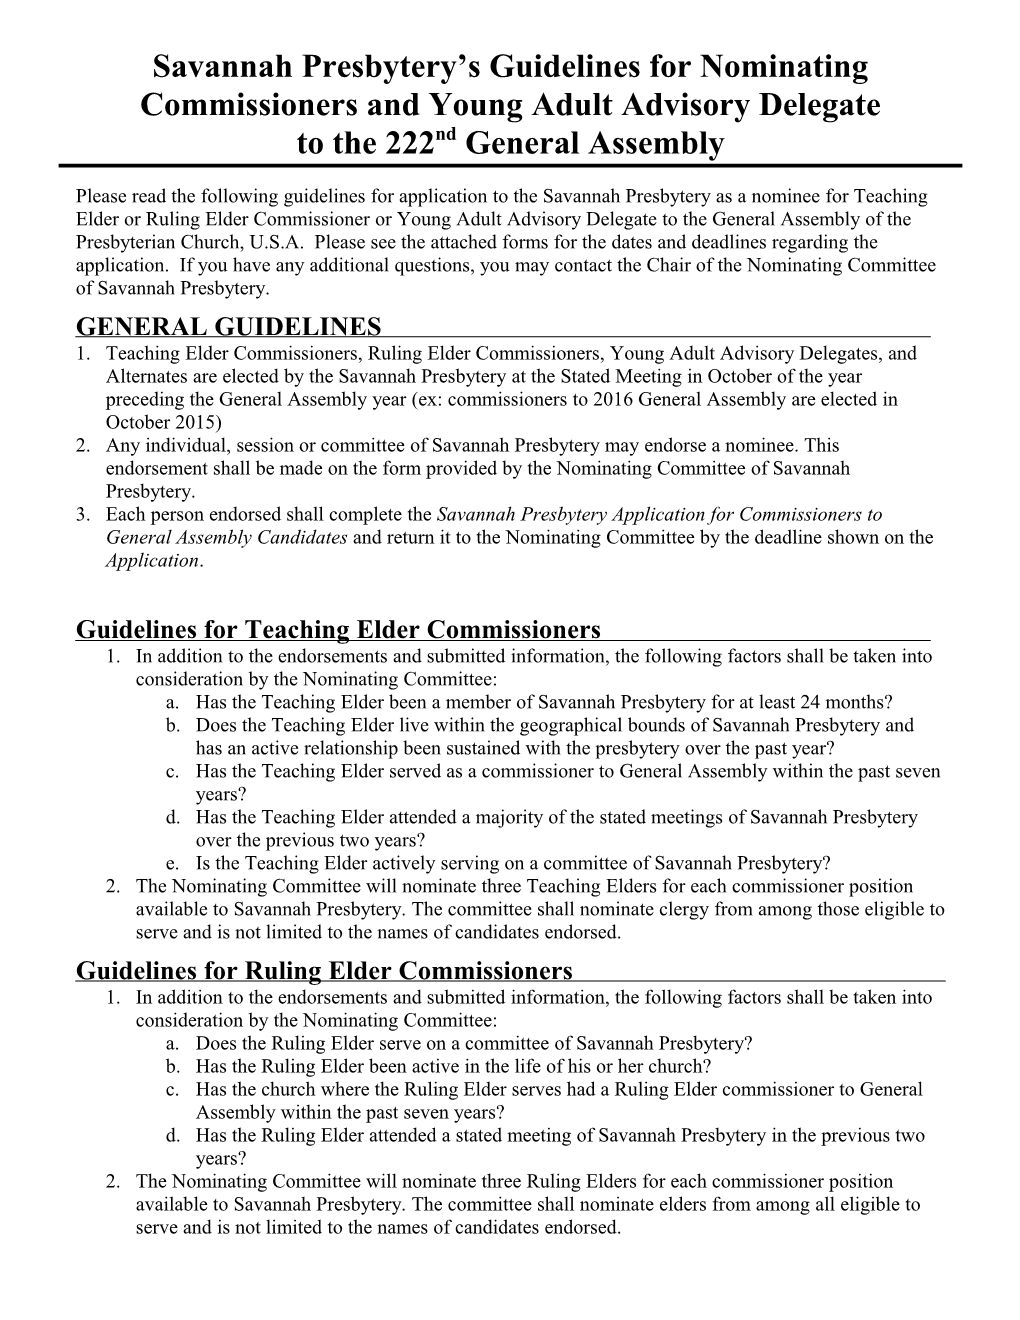 Guidelines for Nominating Commissioners